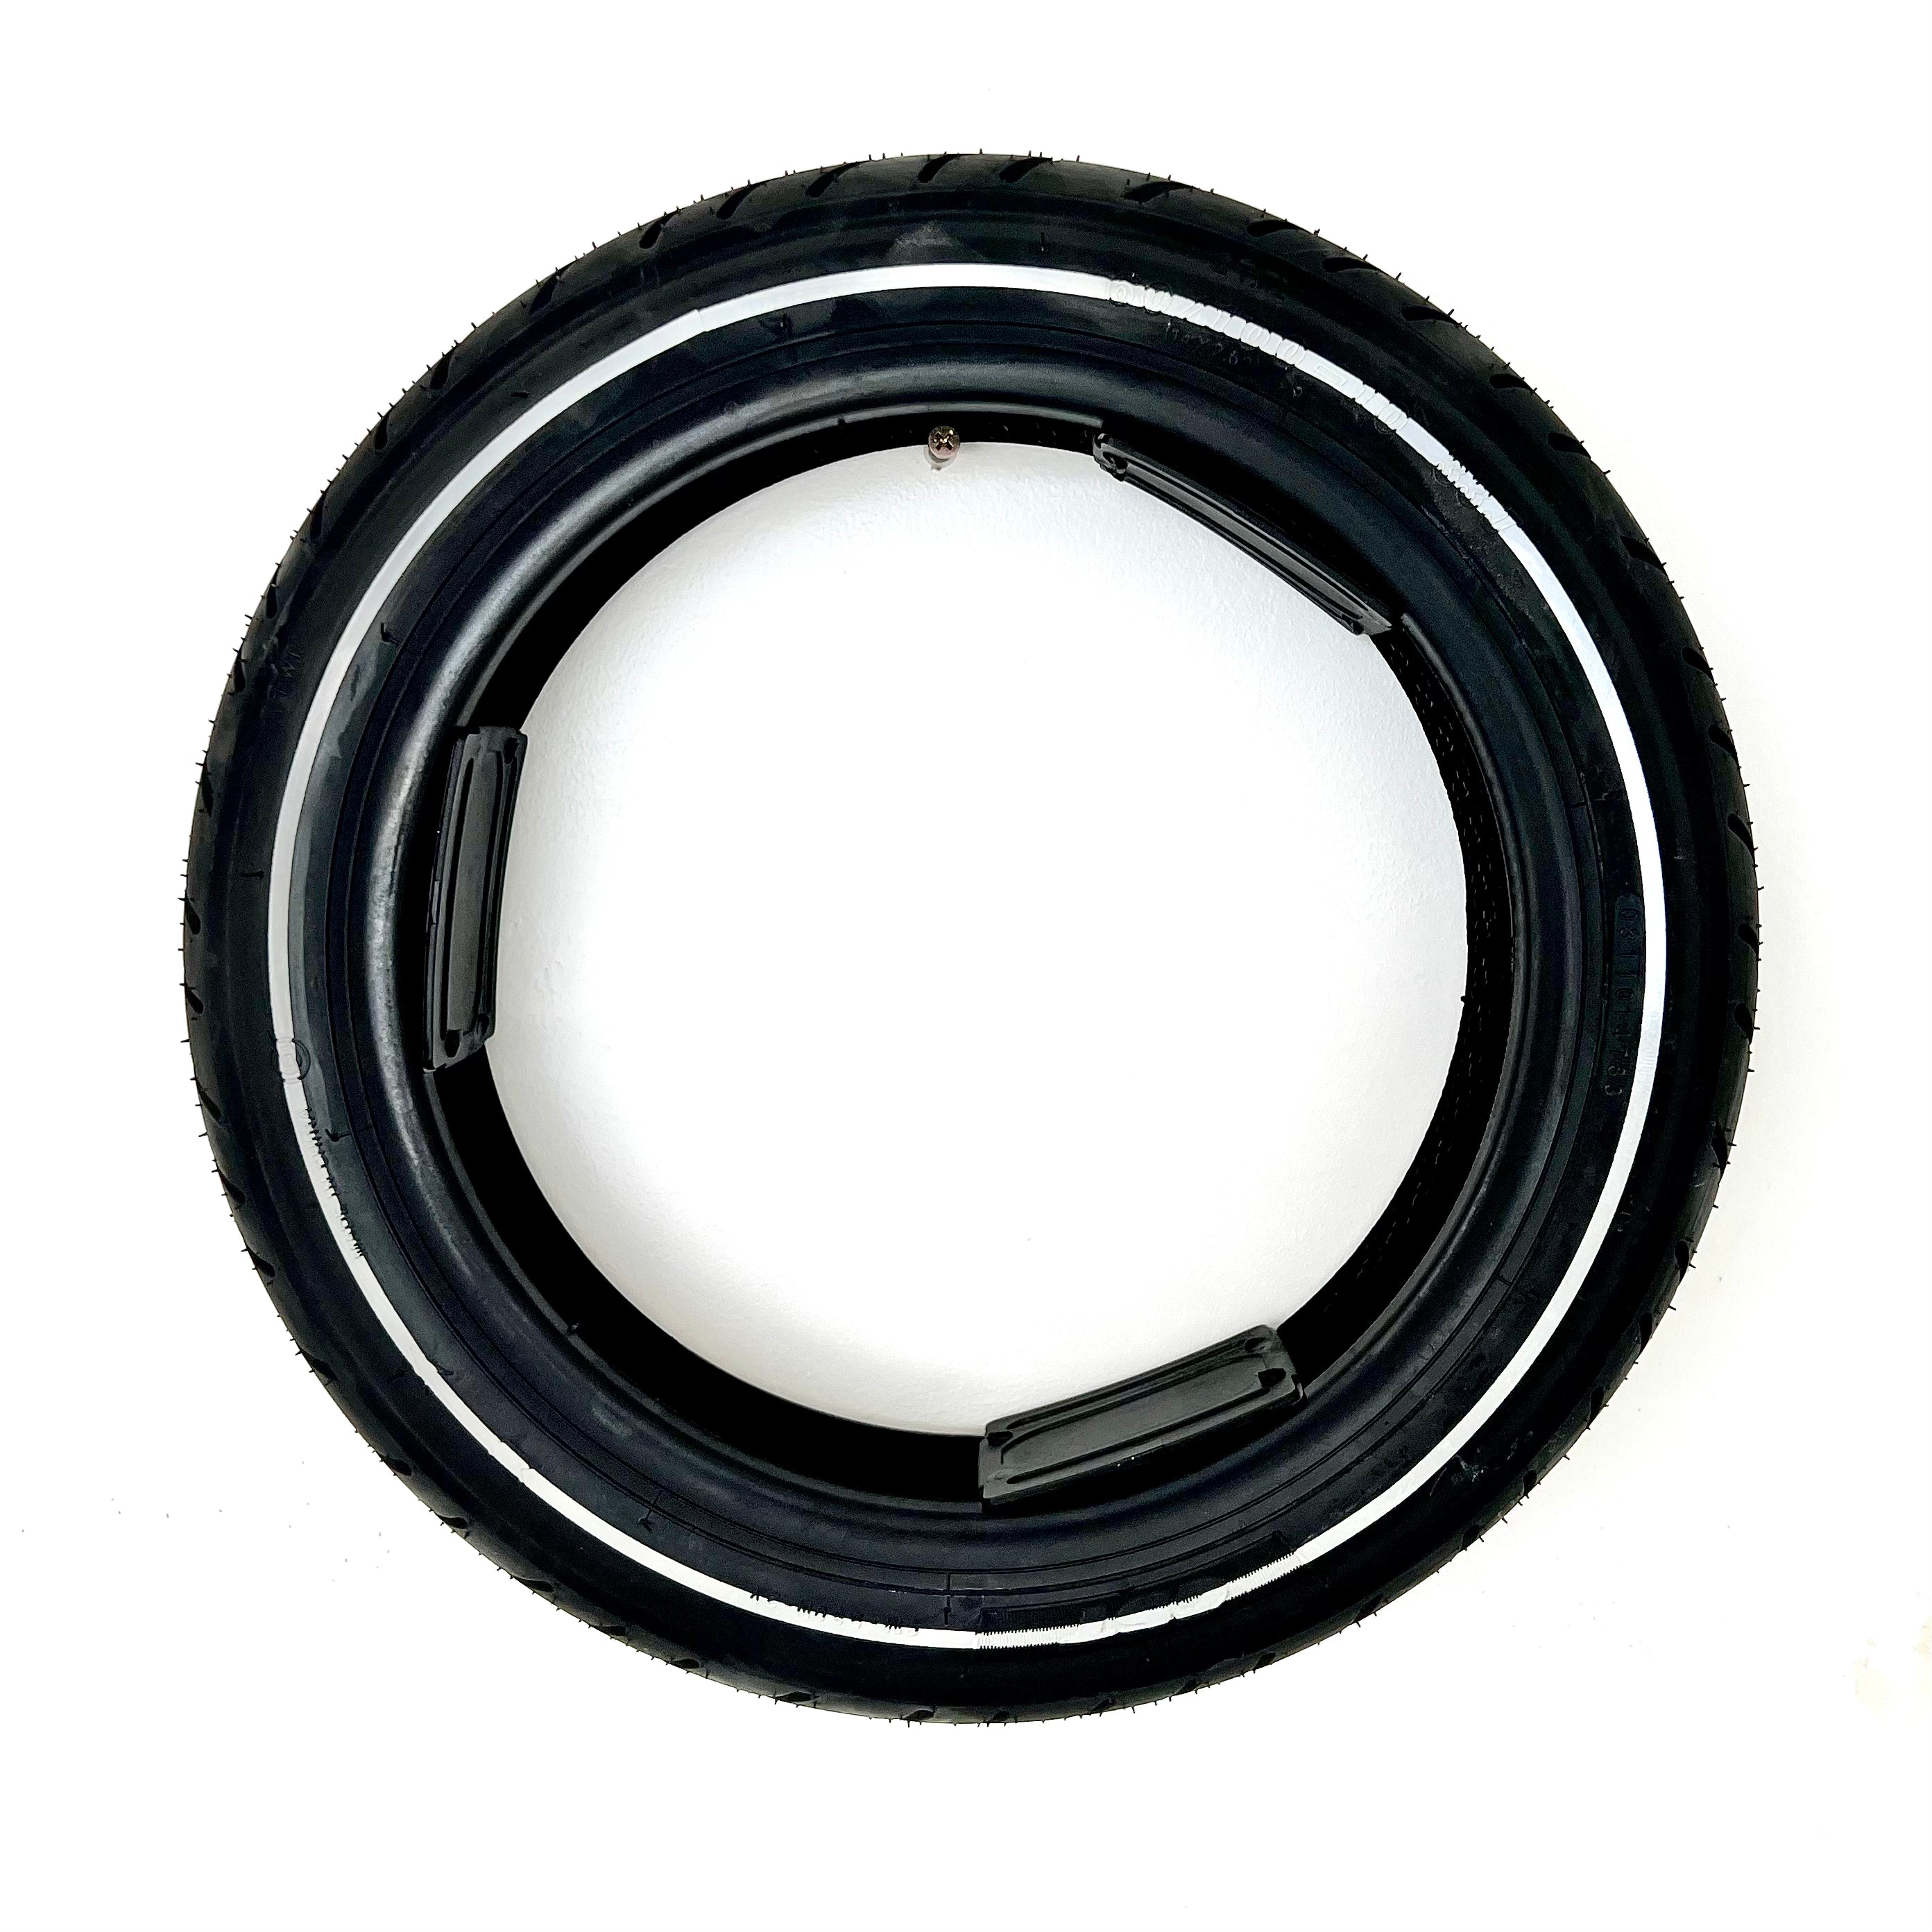 Tire for Segway eMoped C80